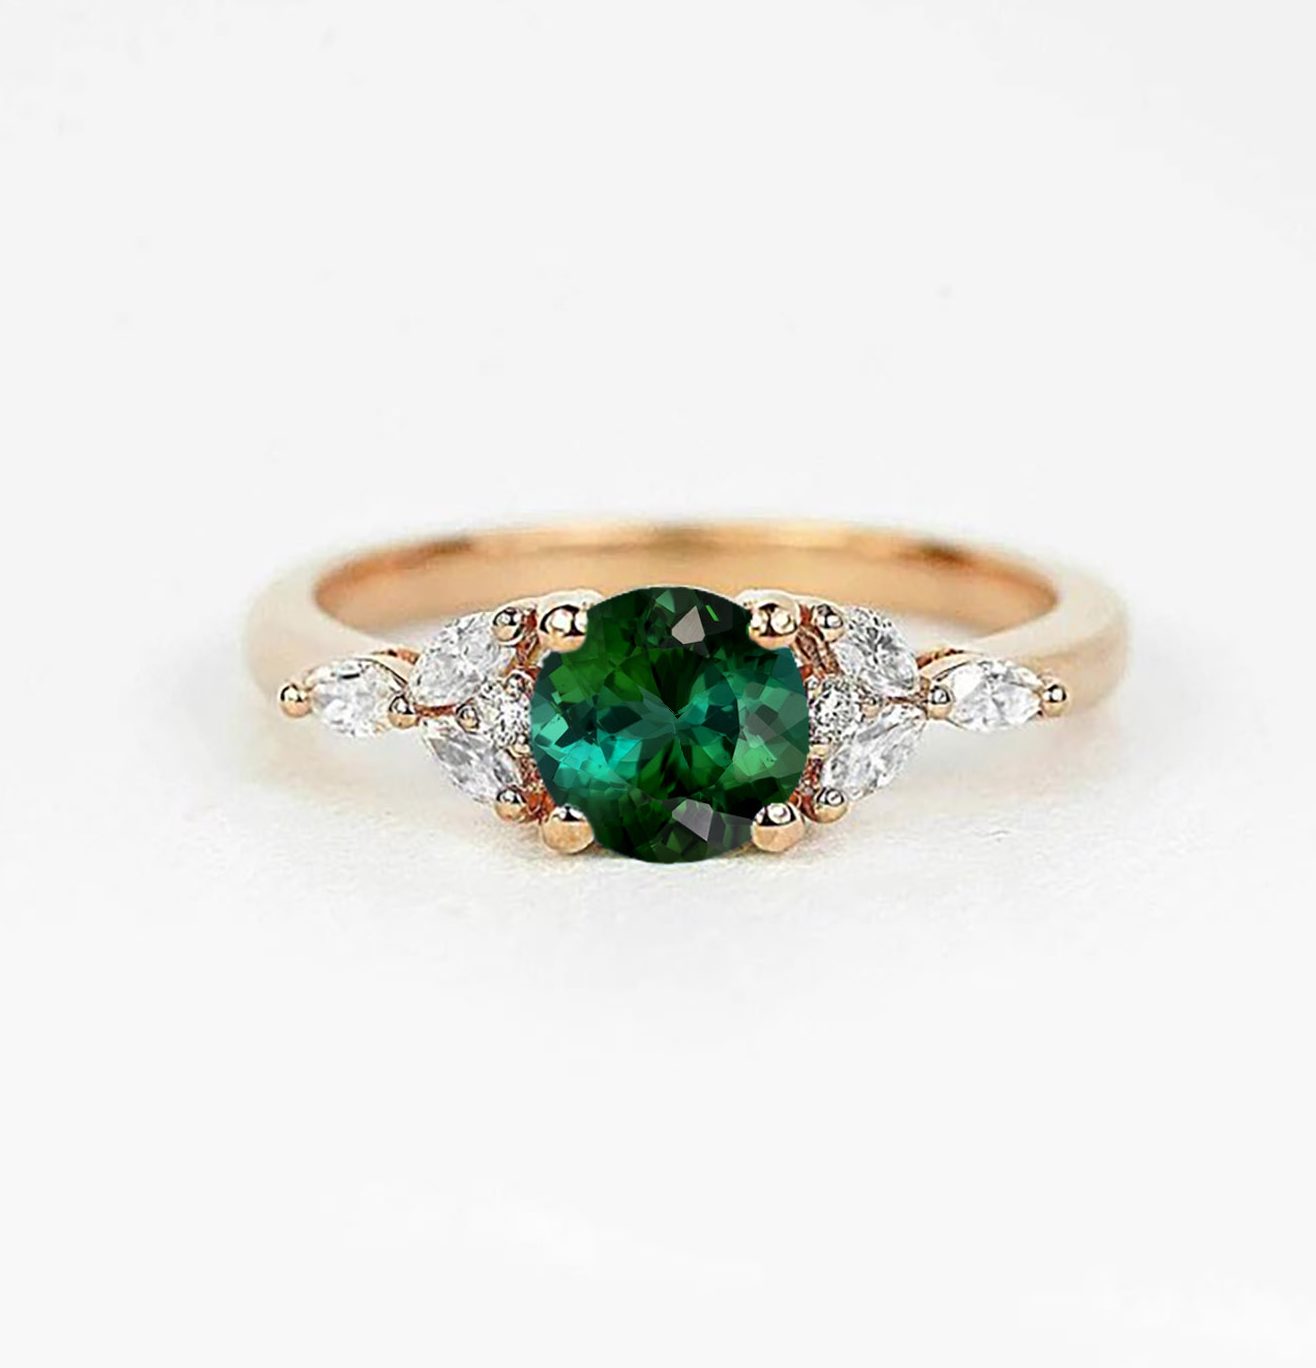 6mm green tourmaline cluster ring